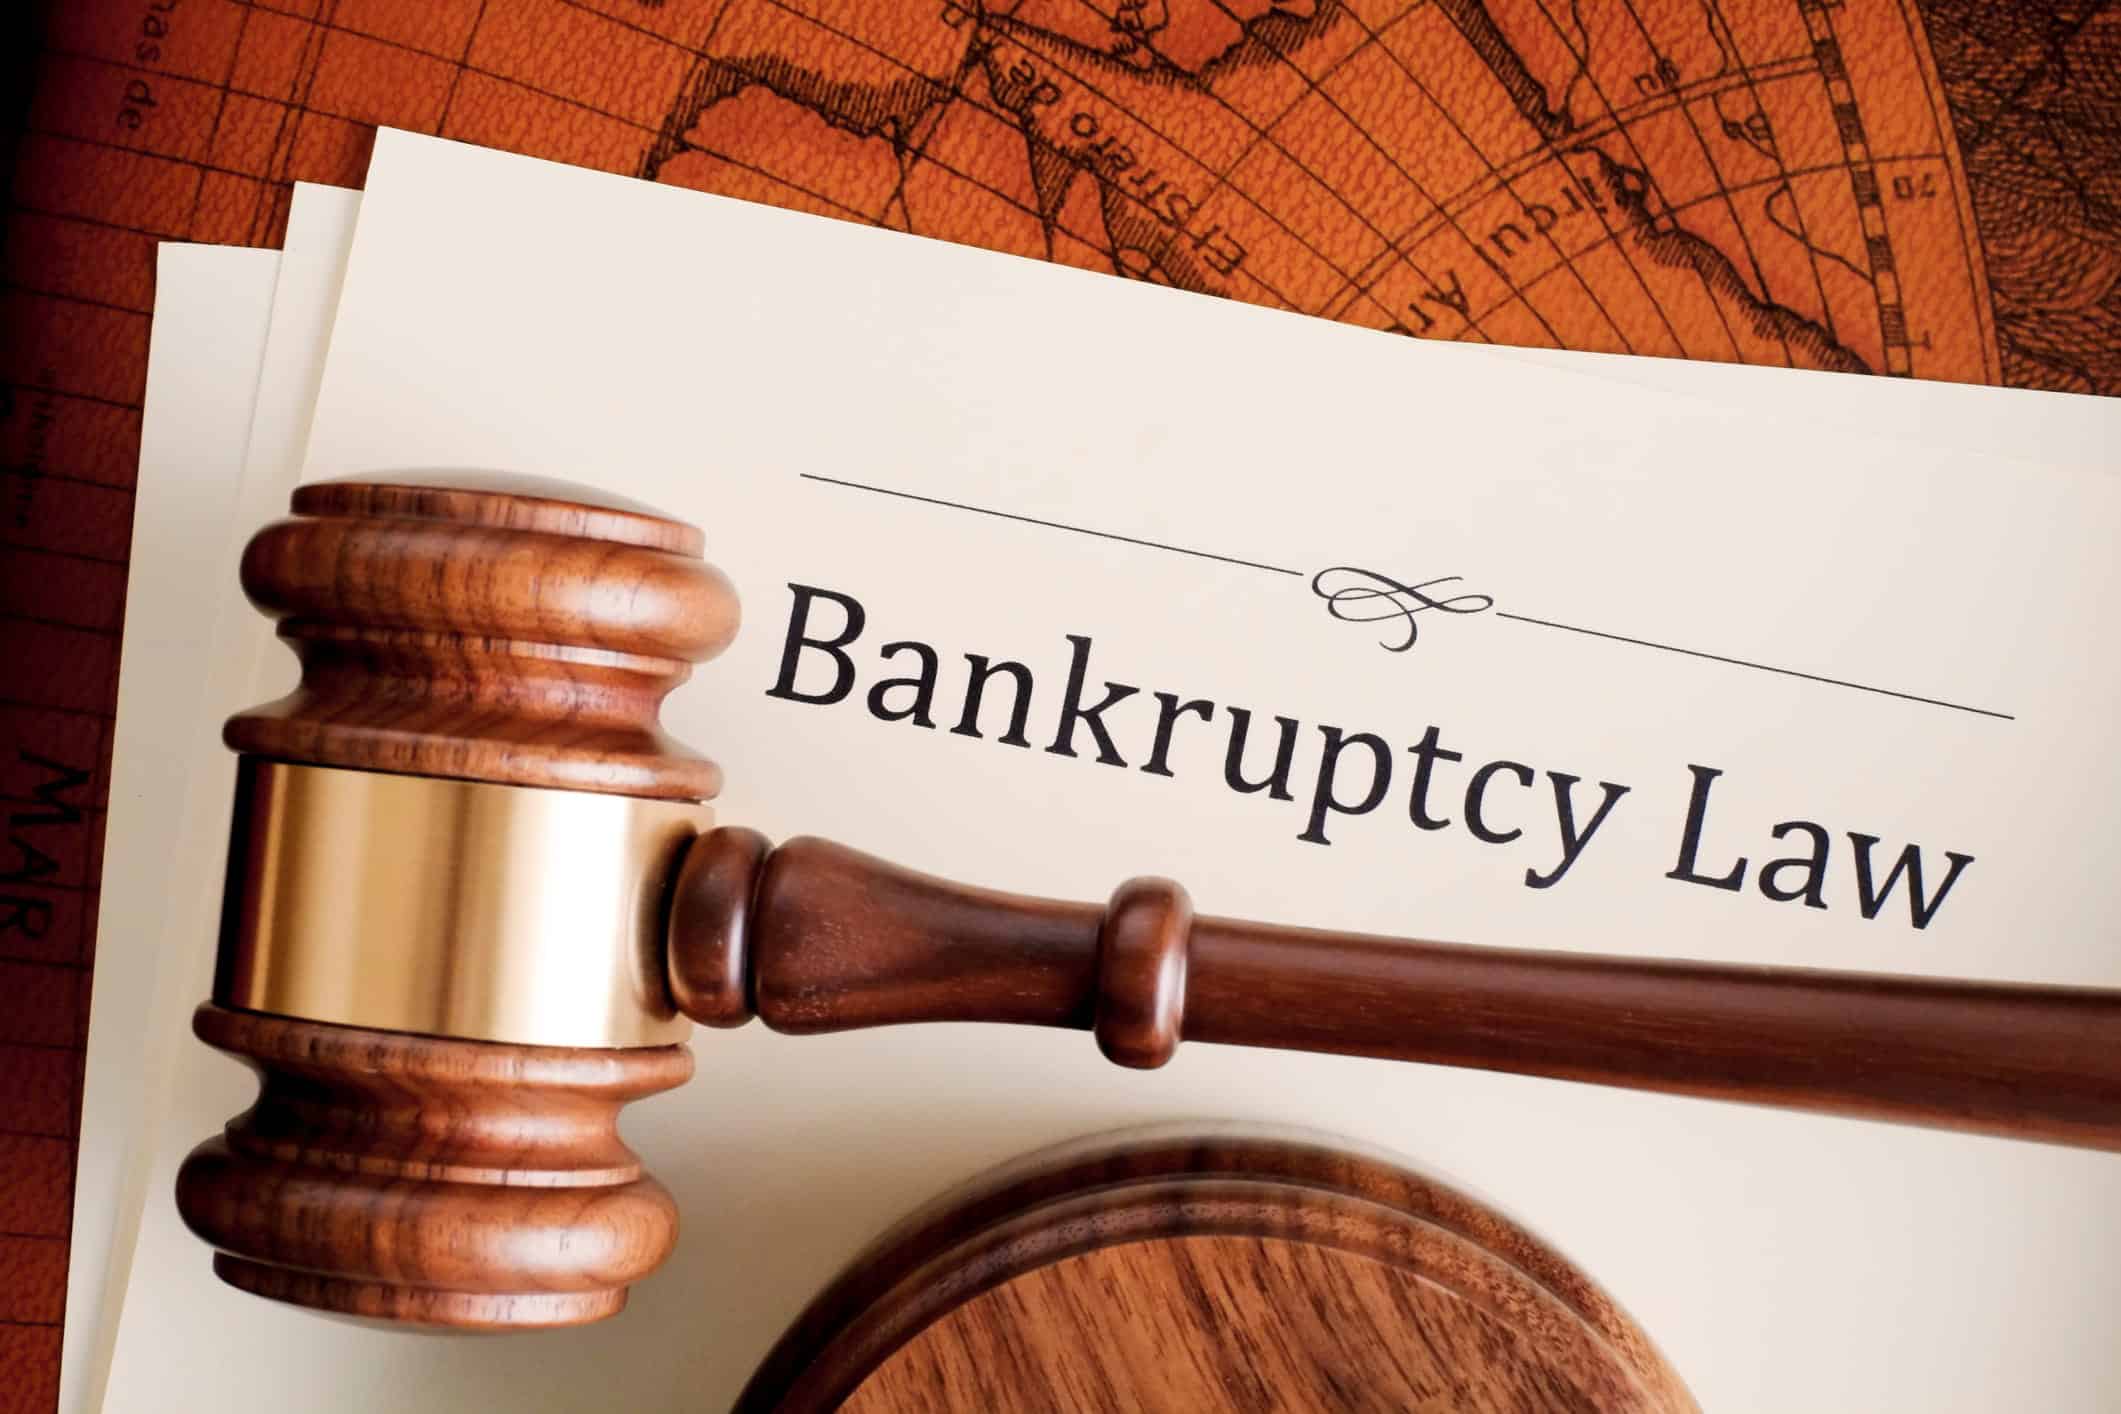 Bankruptcy Law Documents